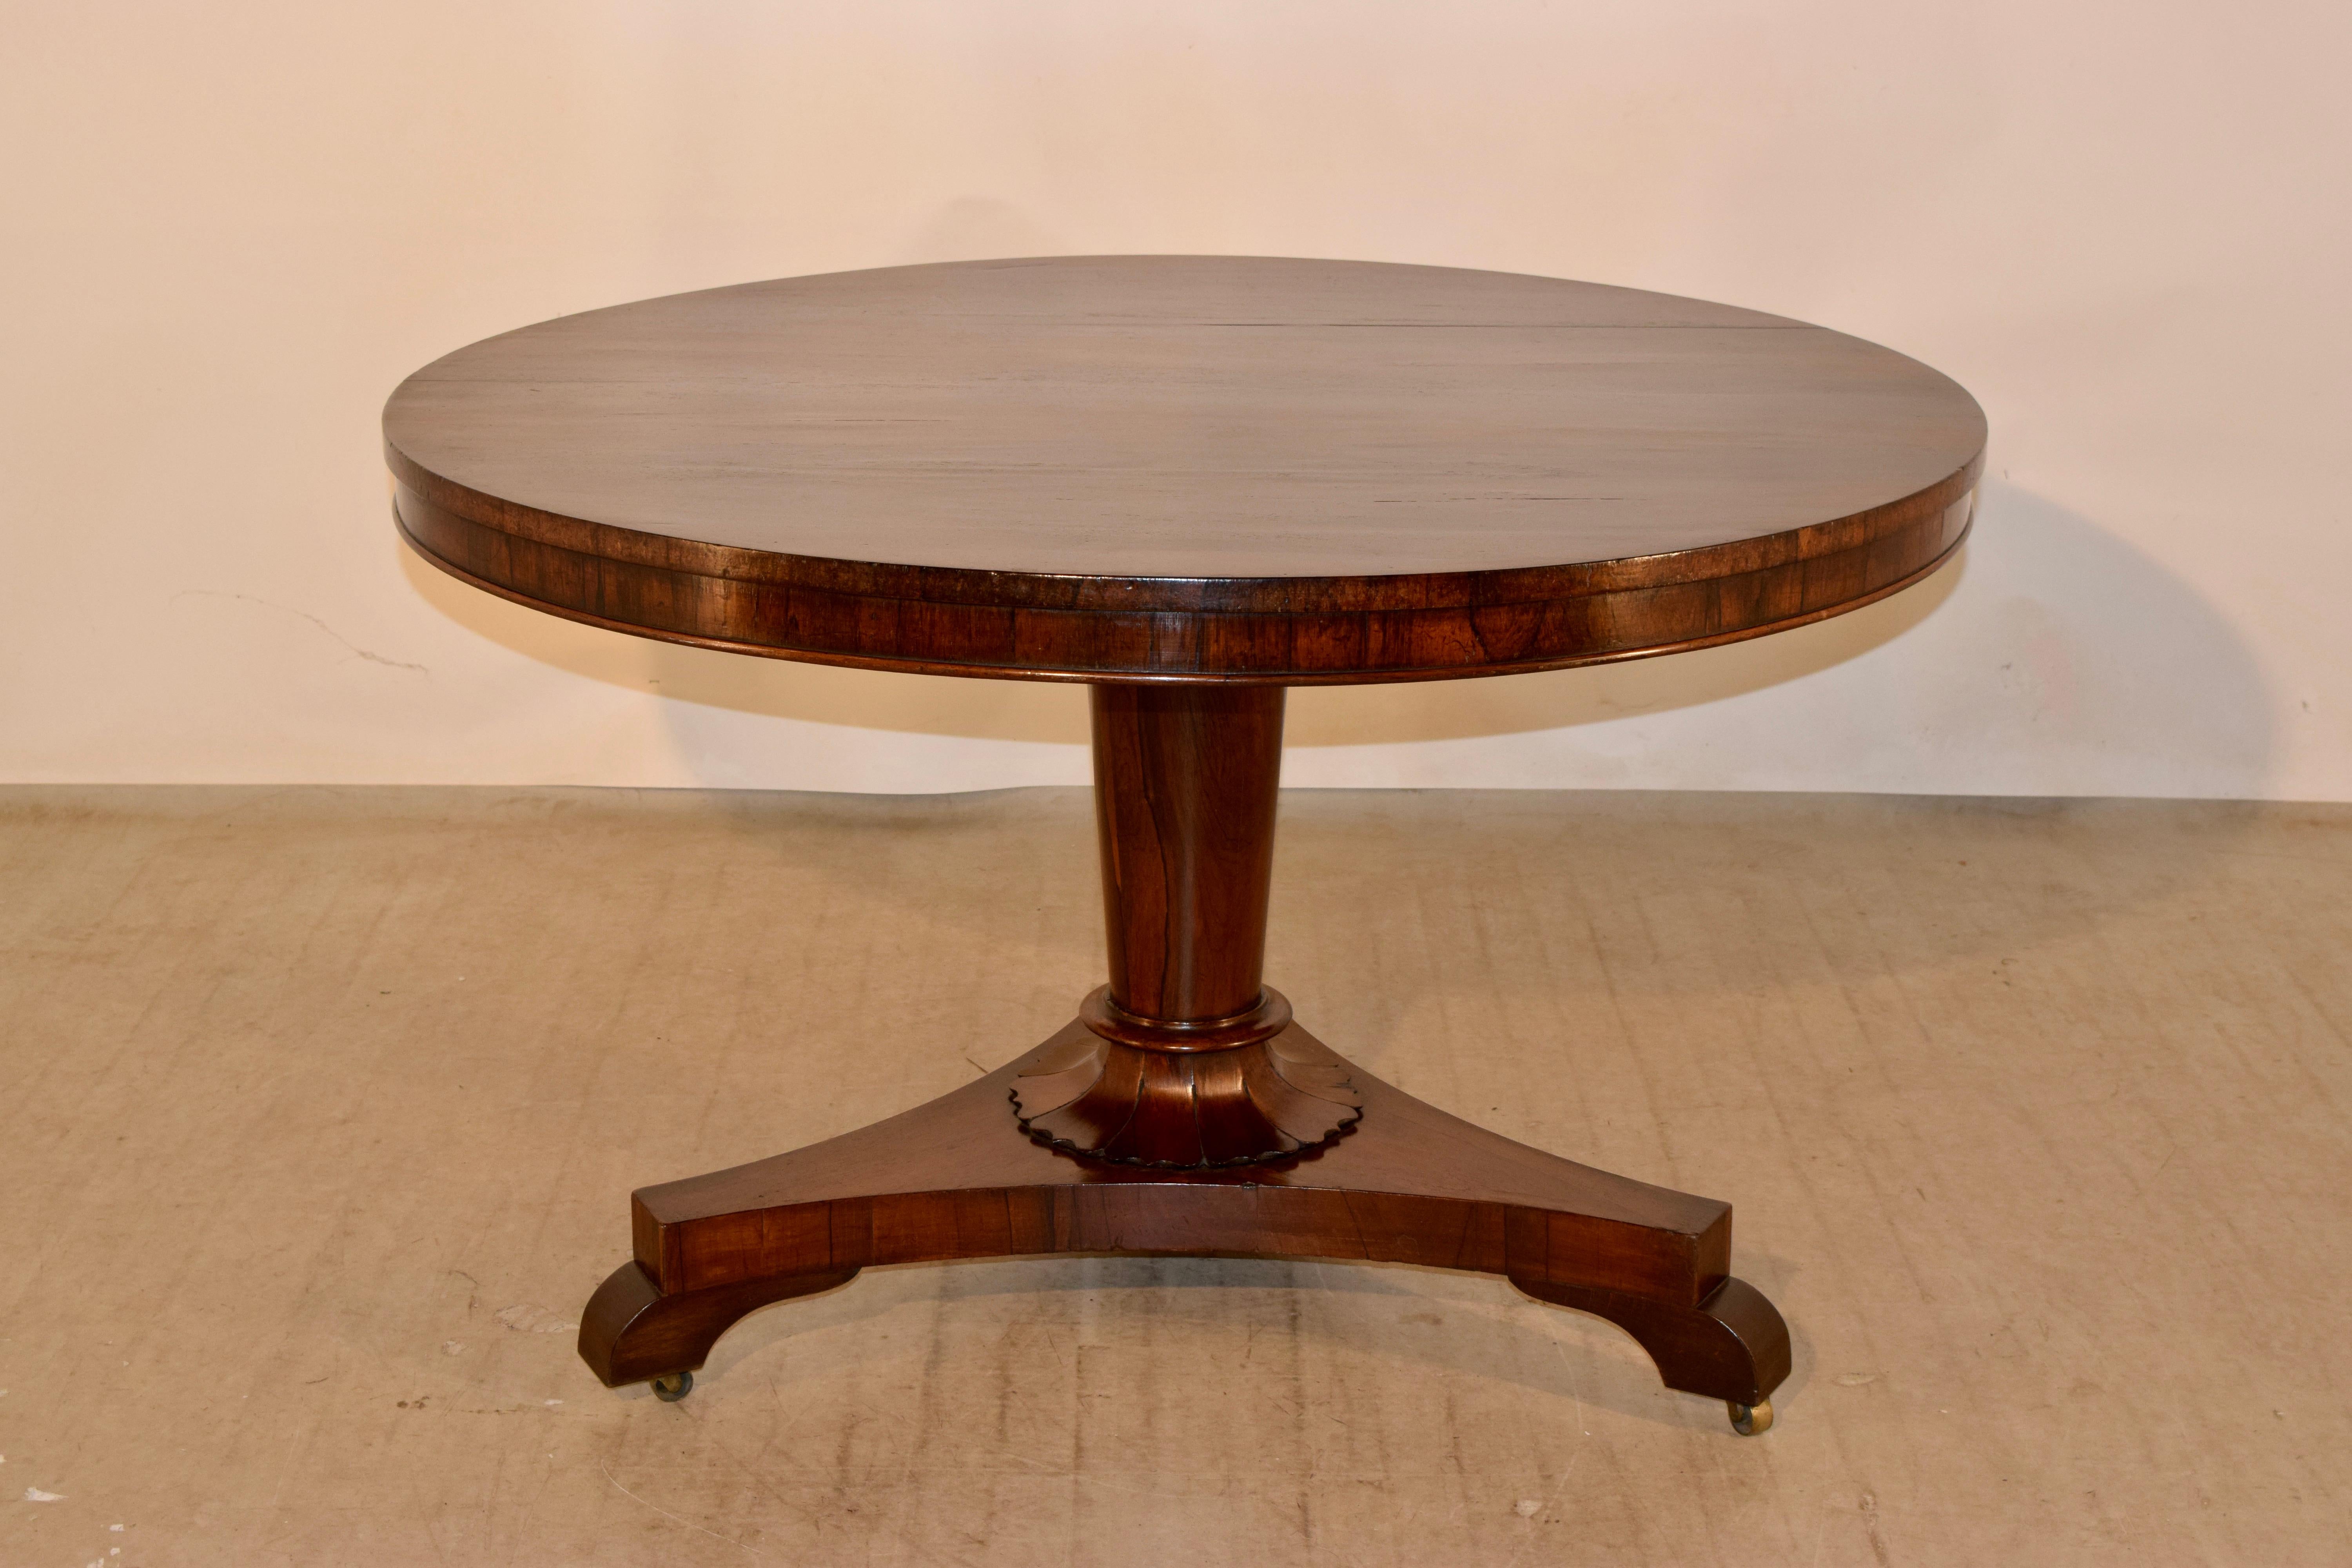 19th century fine quality tilt-top centre table, having a tilt-top with outstanding rosewood grain raised on a simple column with a floral shaped base, terminating in a tricorn base with shaped feet and castors. Measurements when tilt-top is down